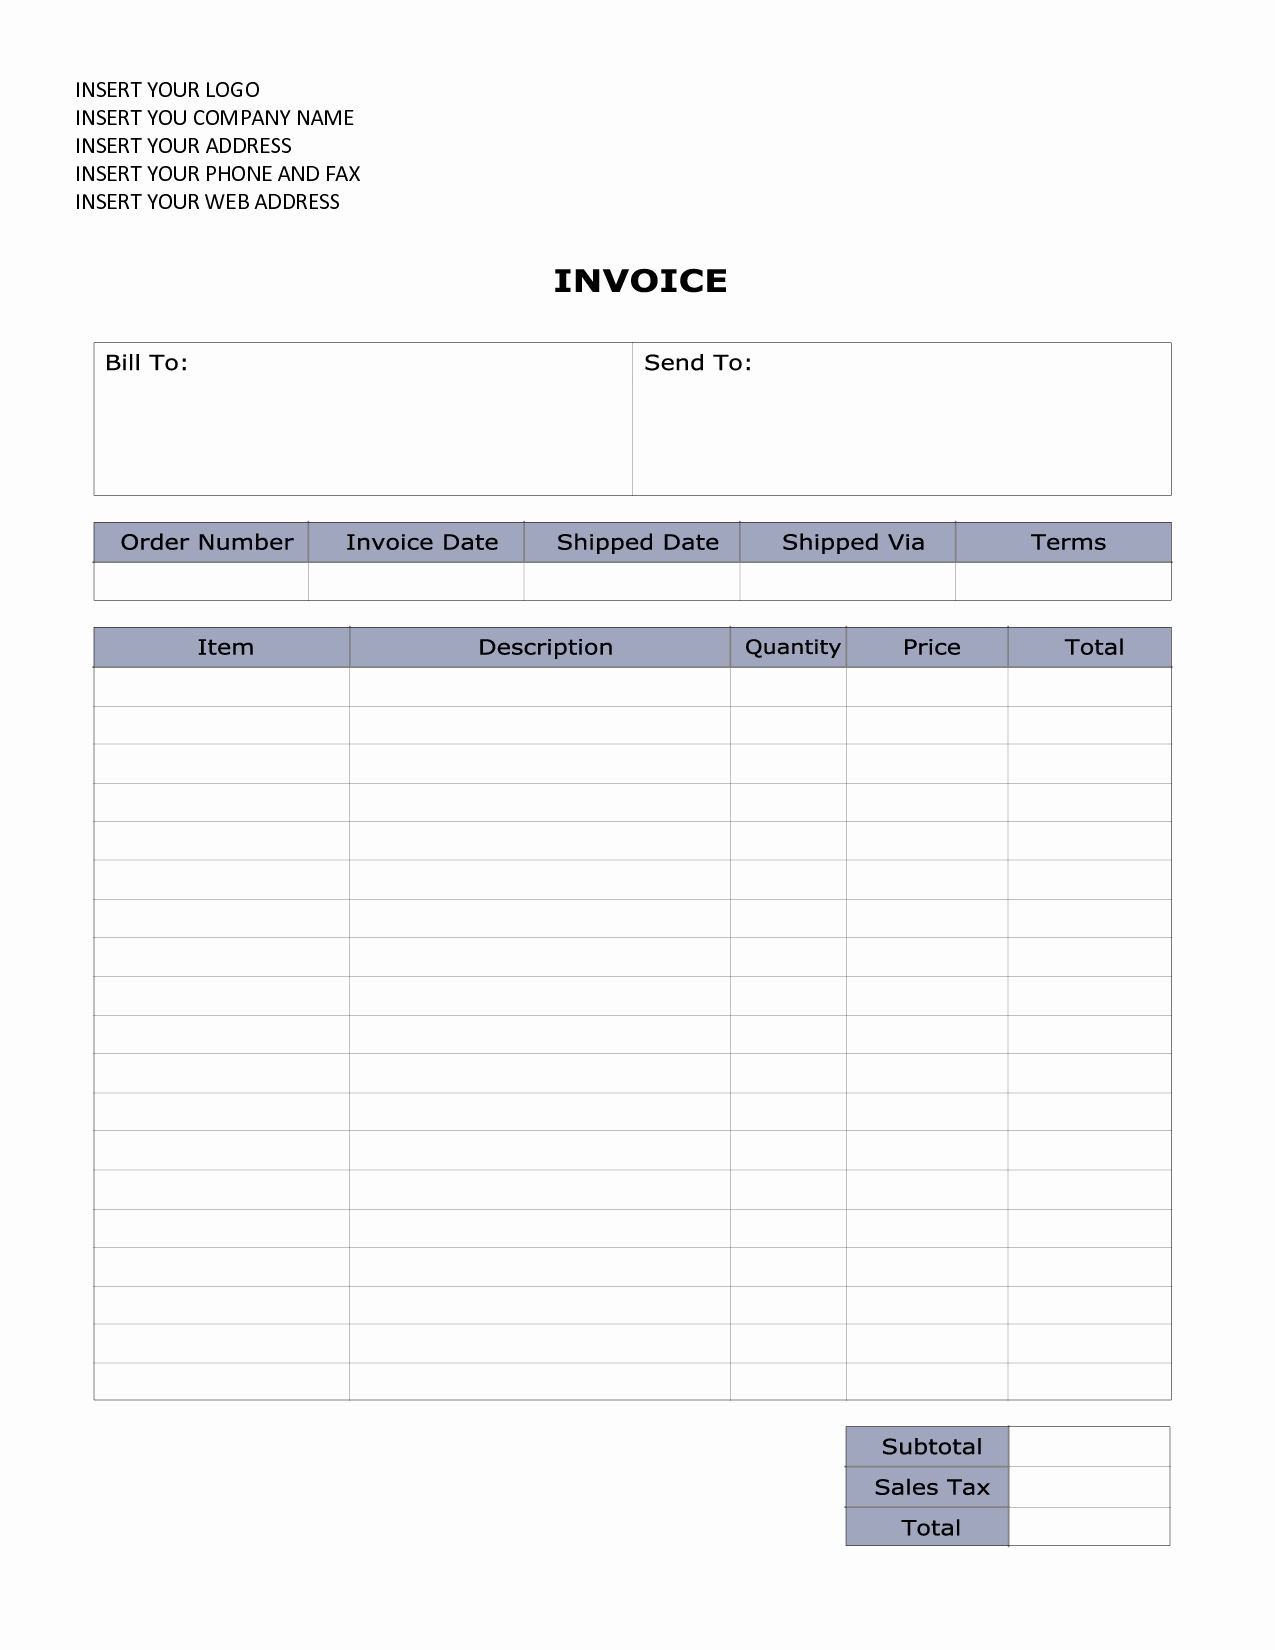 Examples Of Invoices In Word Inspirational Invoice Template Word 2010